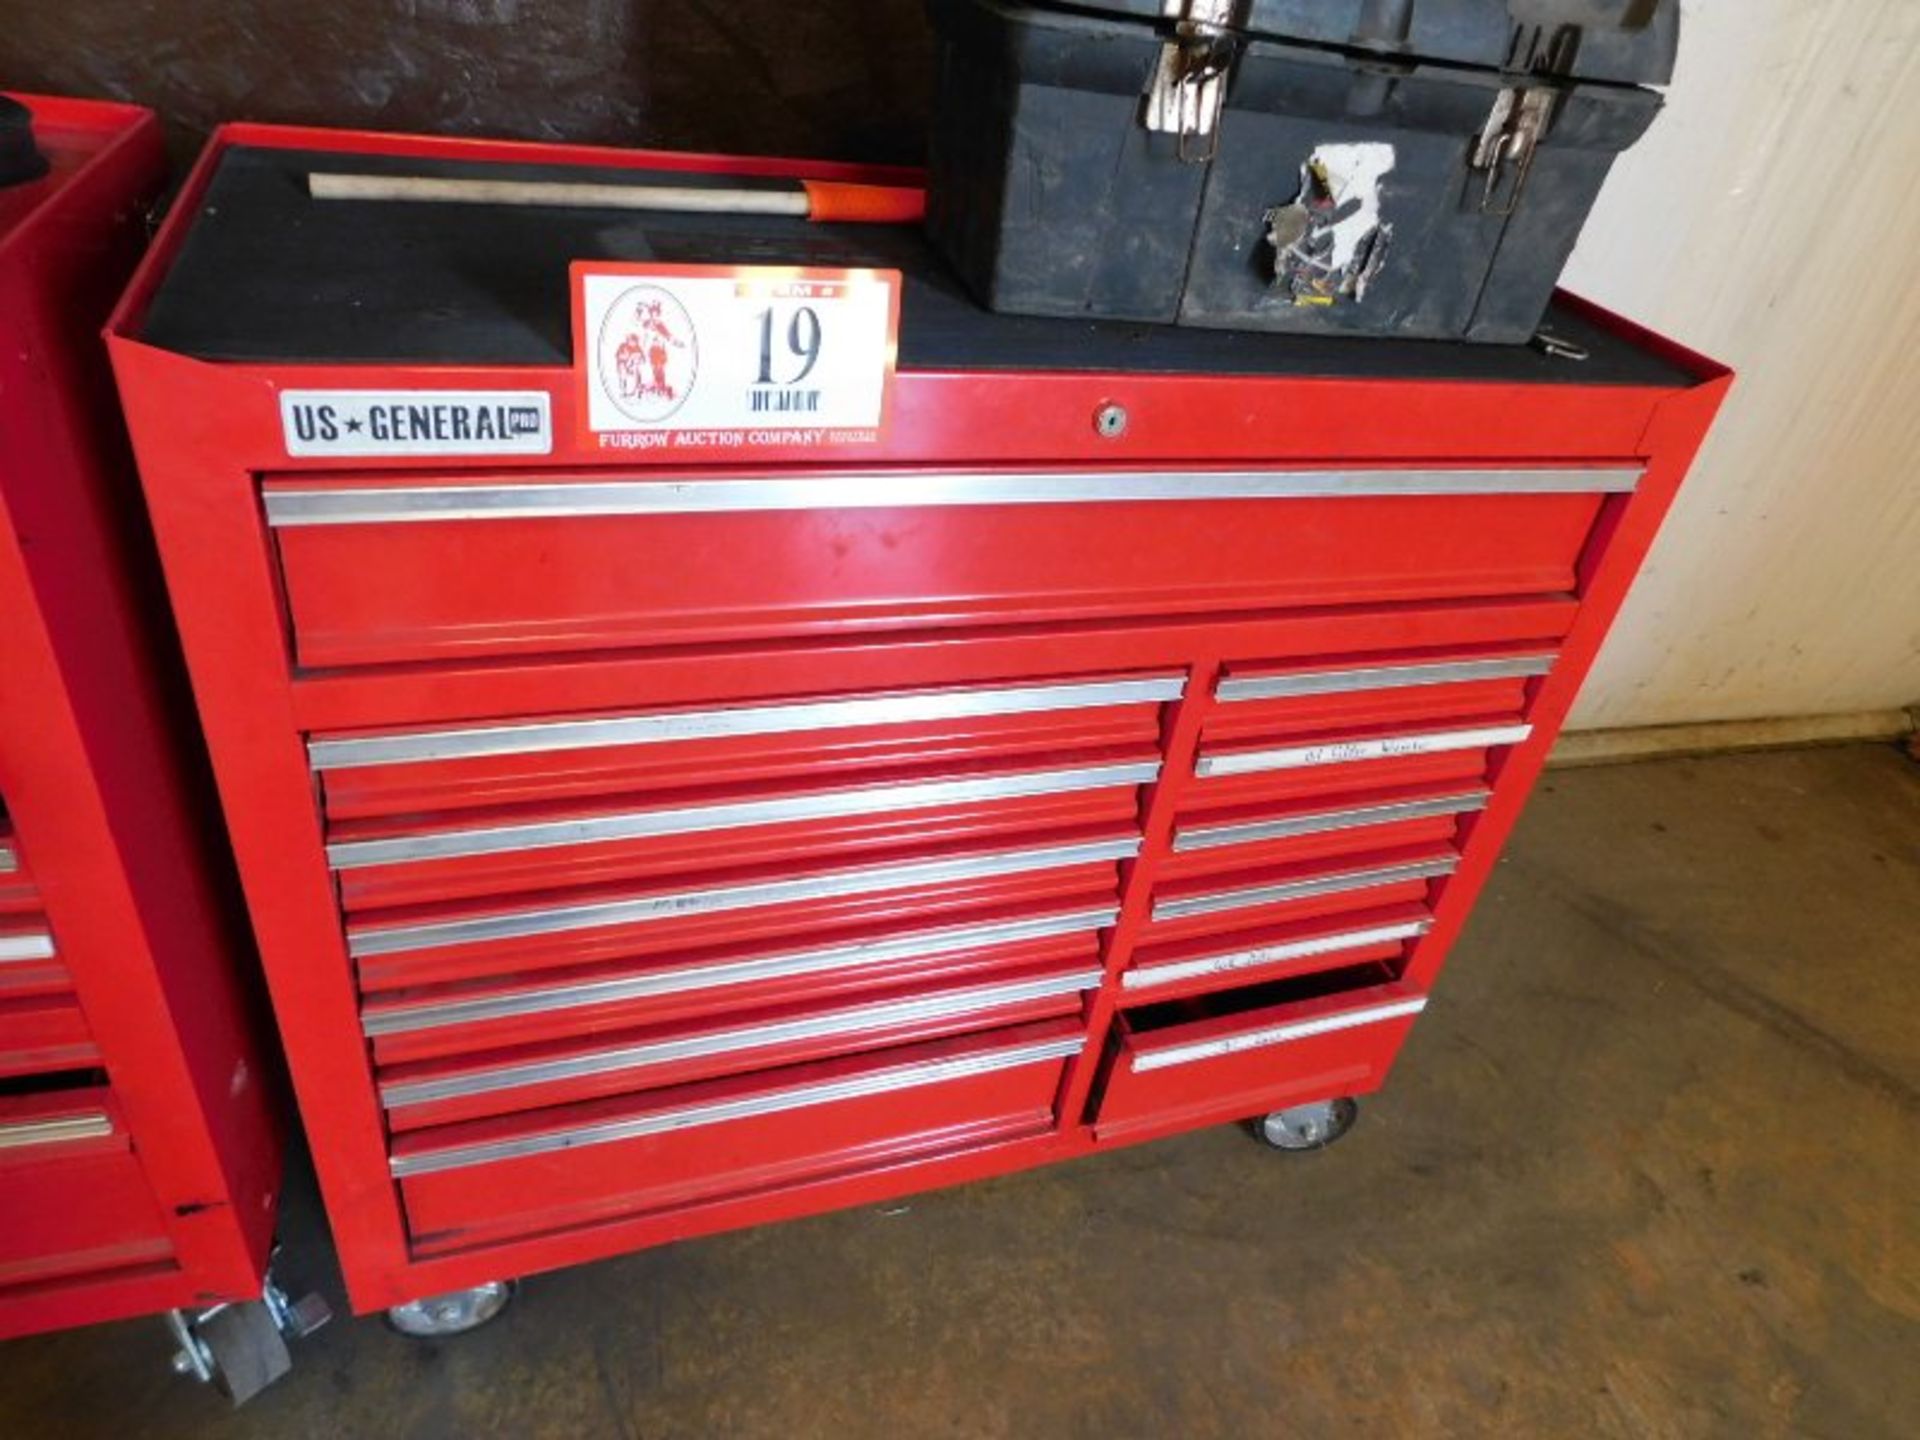 US General 13-Drawer Tool Box, w/Contents, Screwdrivers, Wrenches, Drill Bits, Sockets, etc.